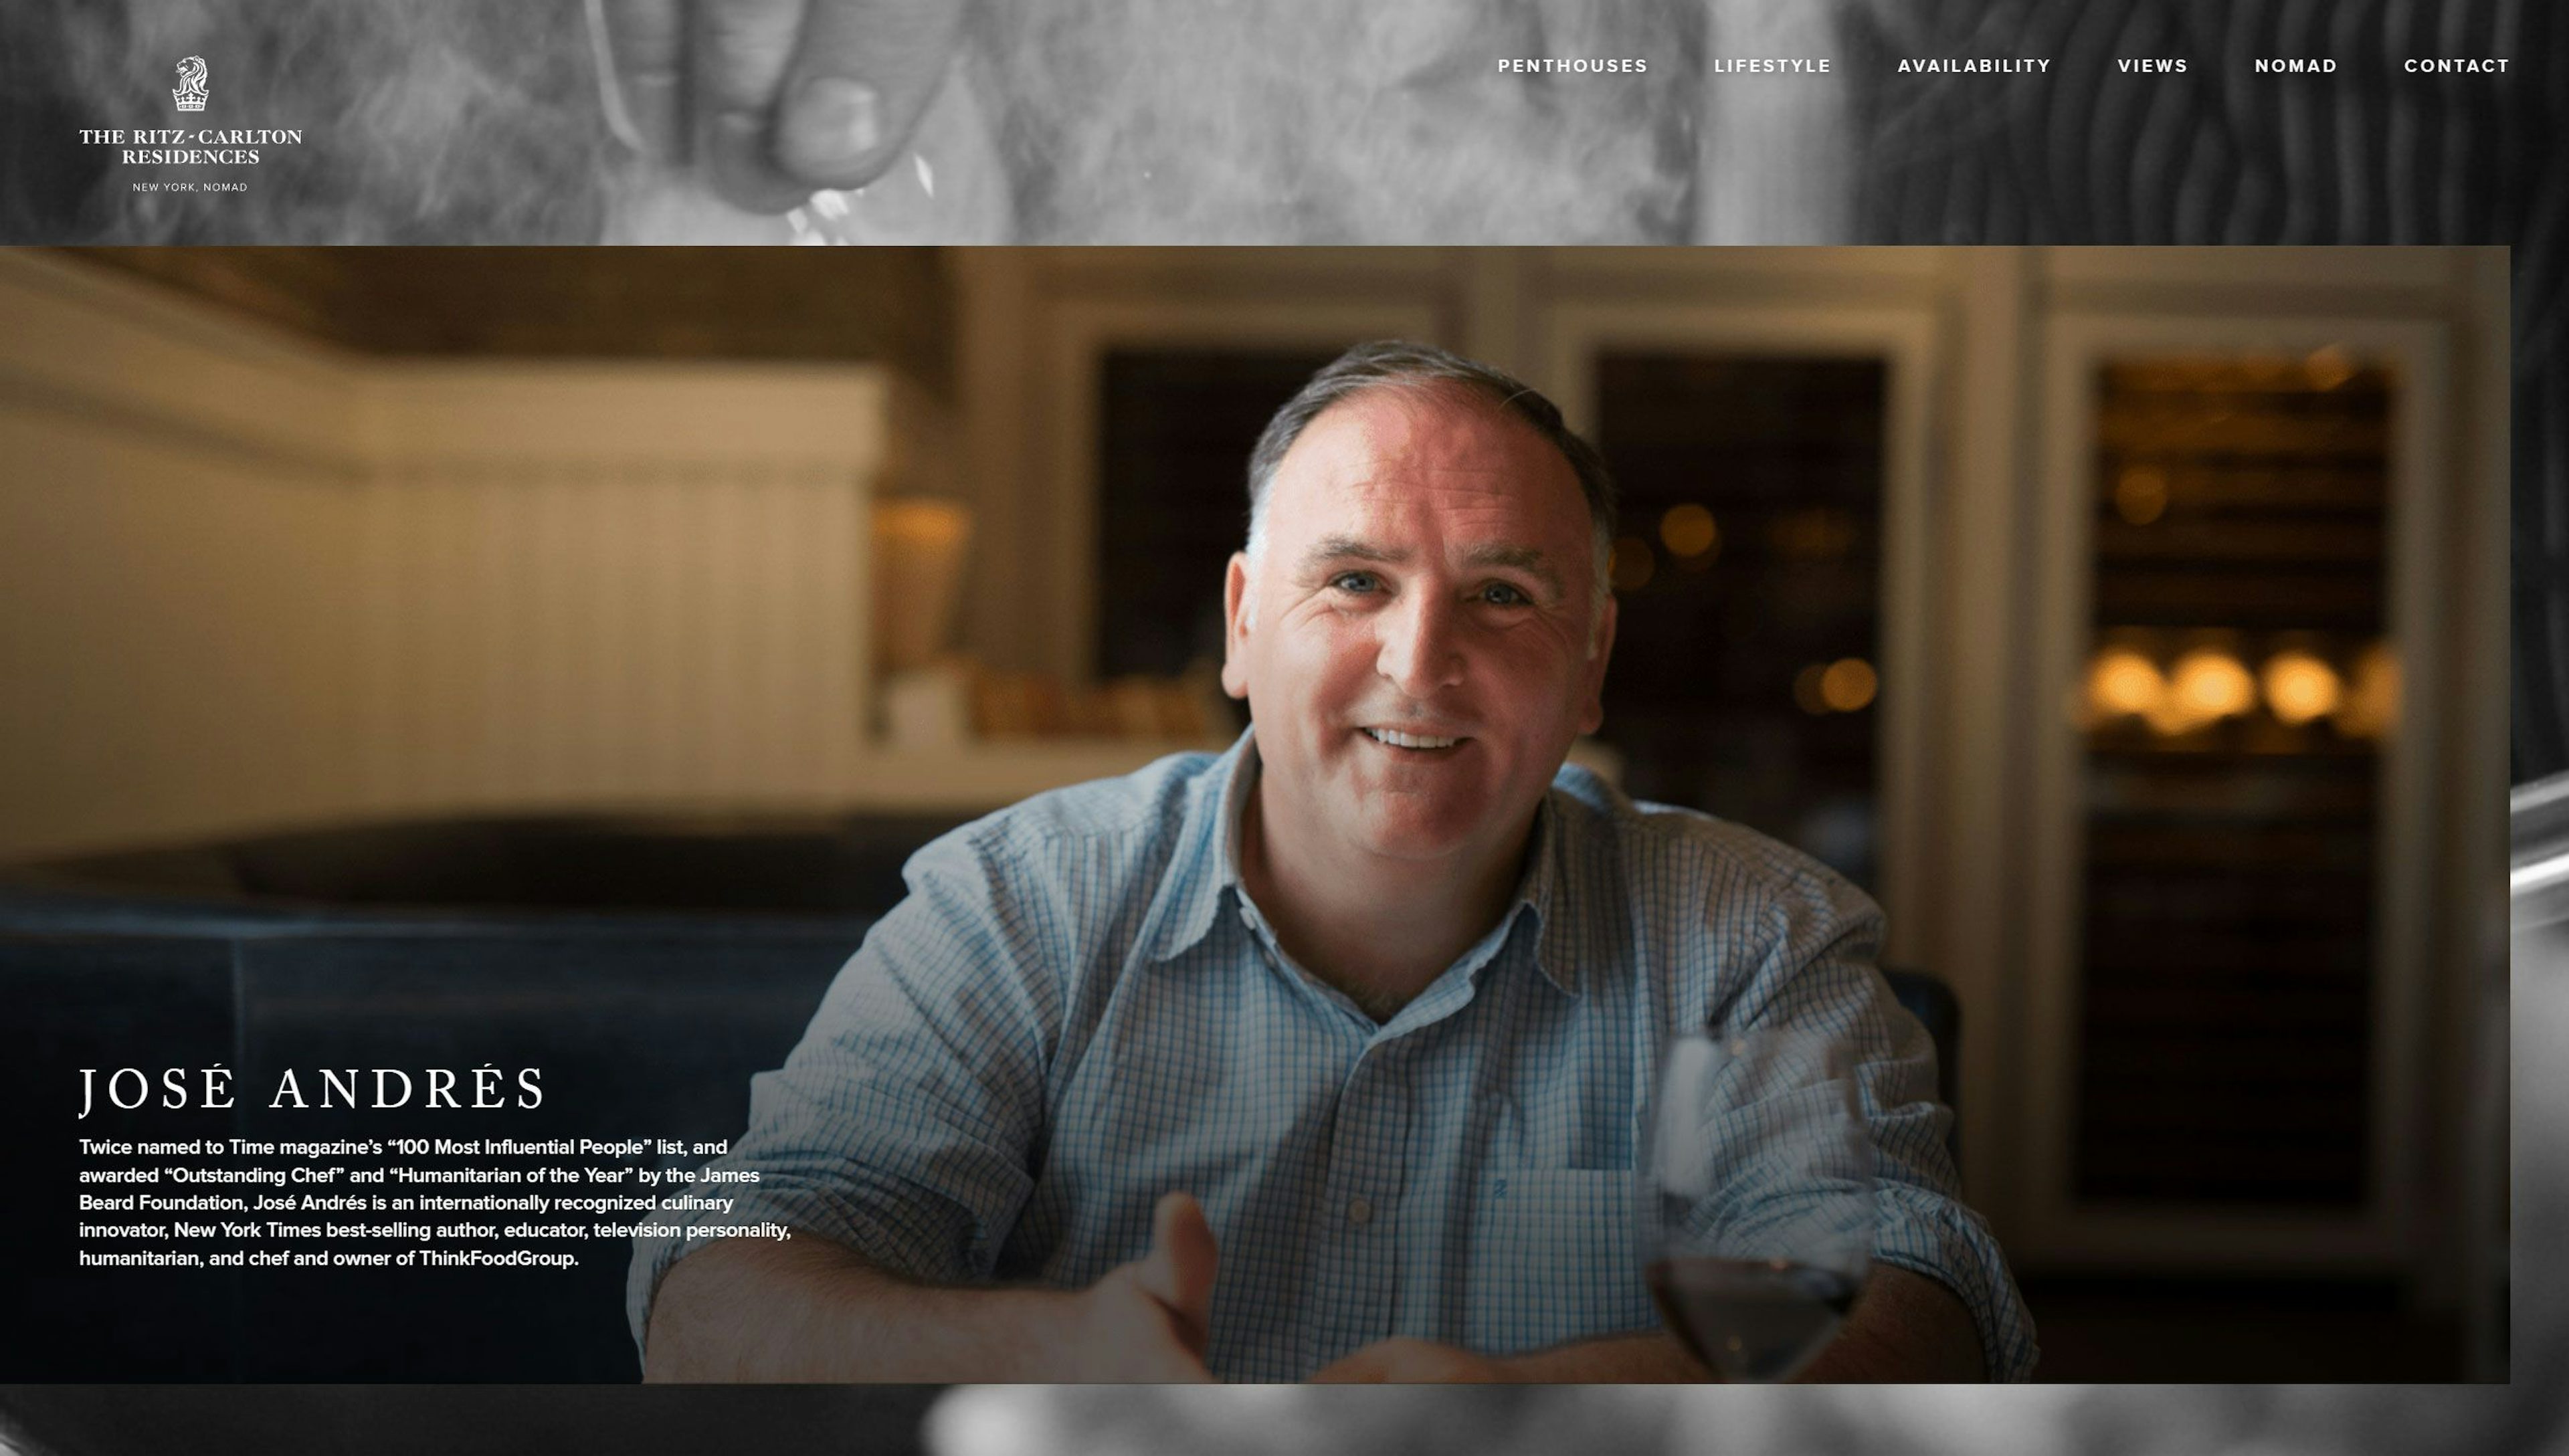 An screenshot of an Chef Jose Andres with descriptive text